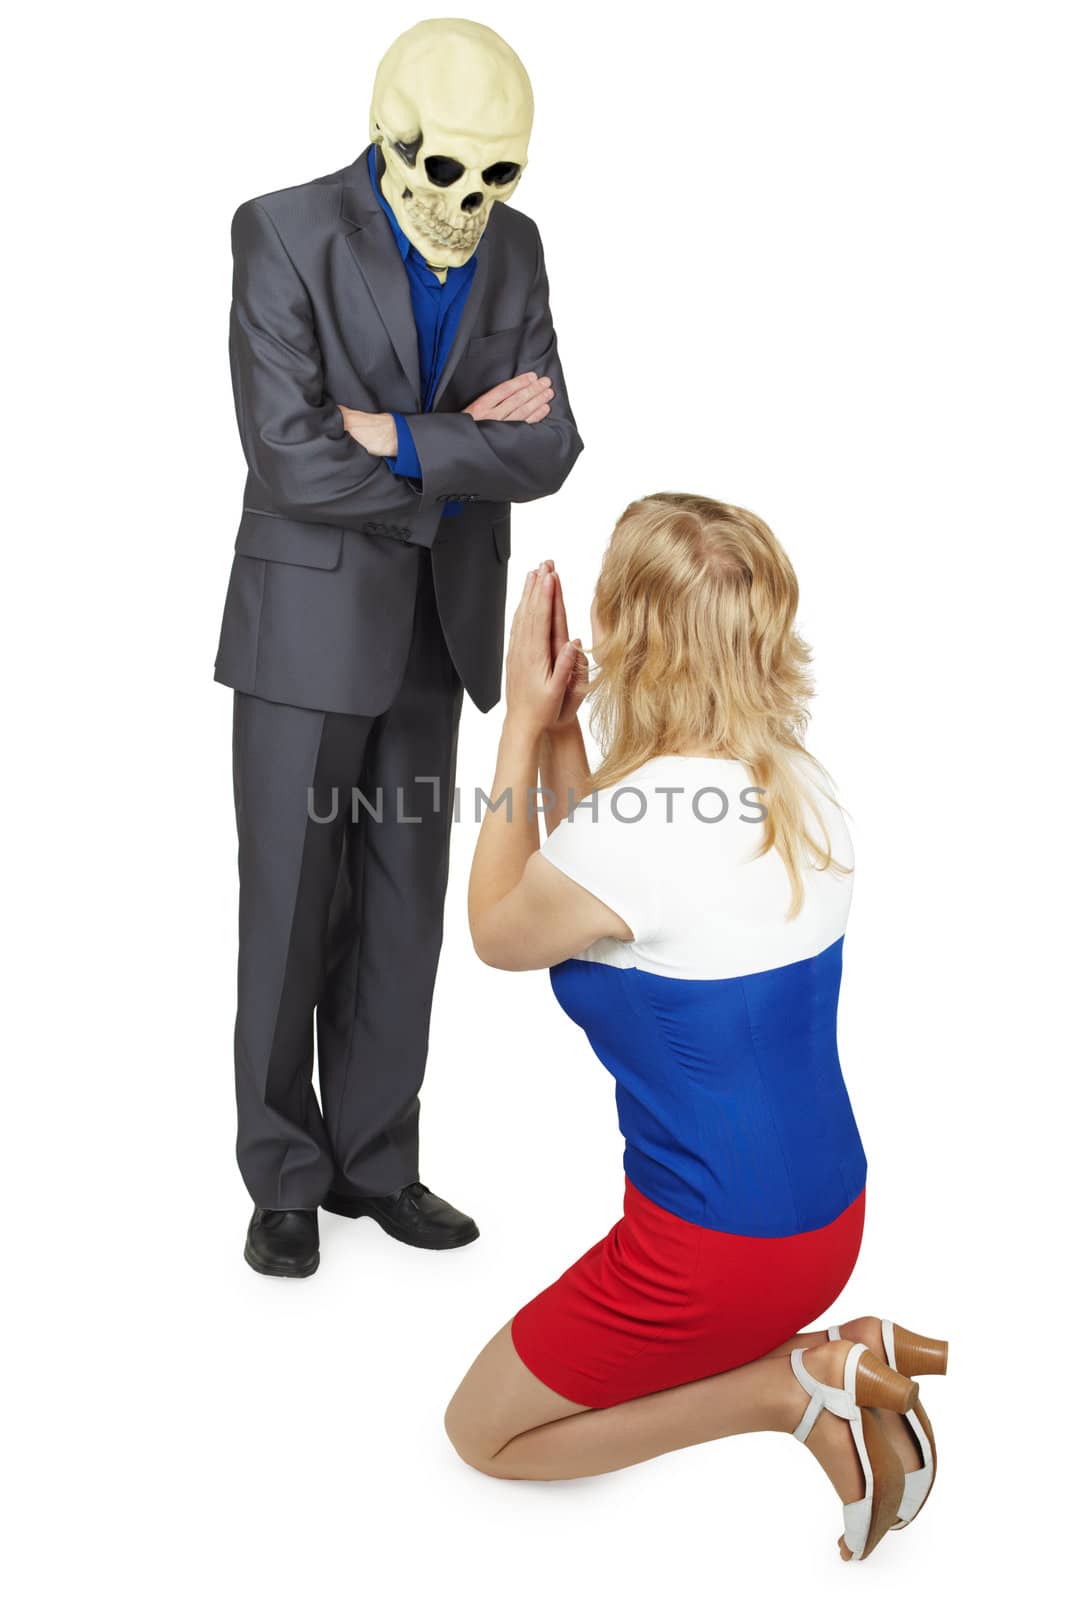 The young woman asks death about mercy kneeling